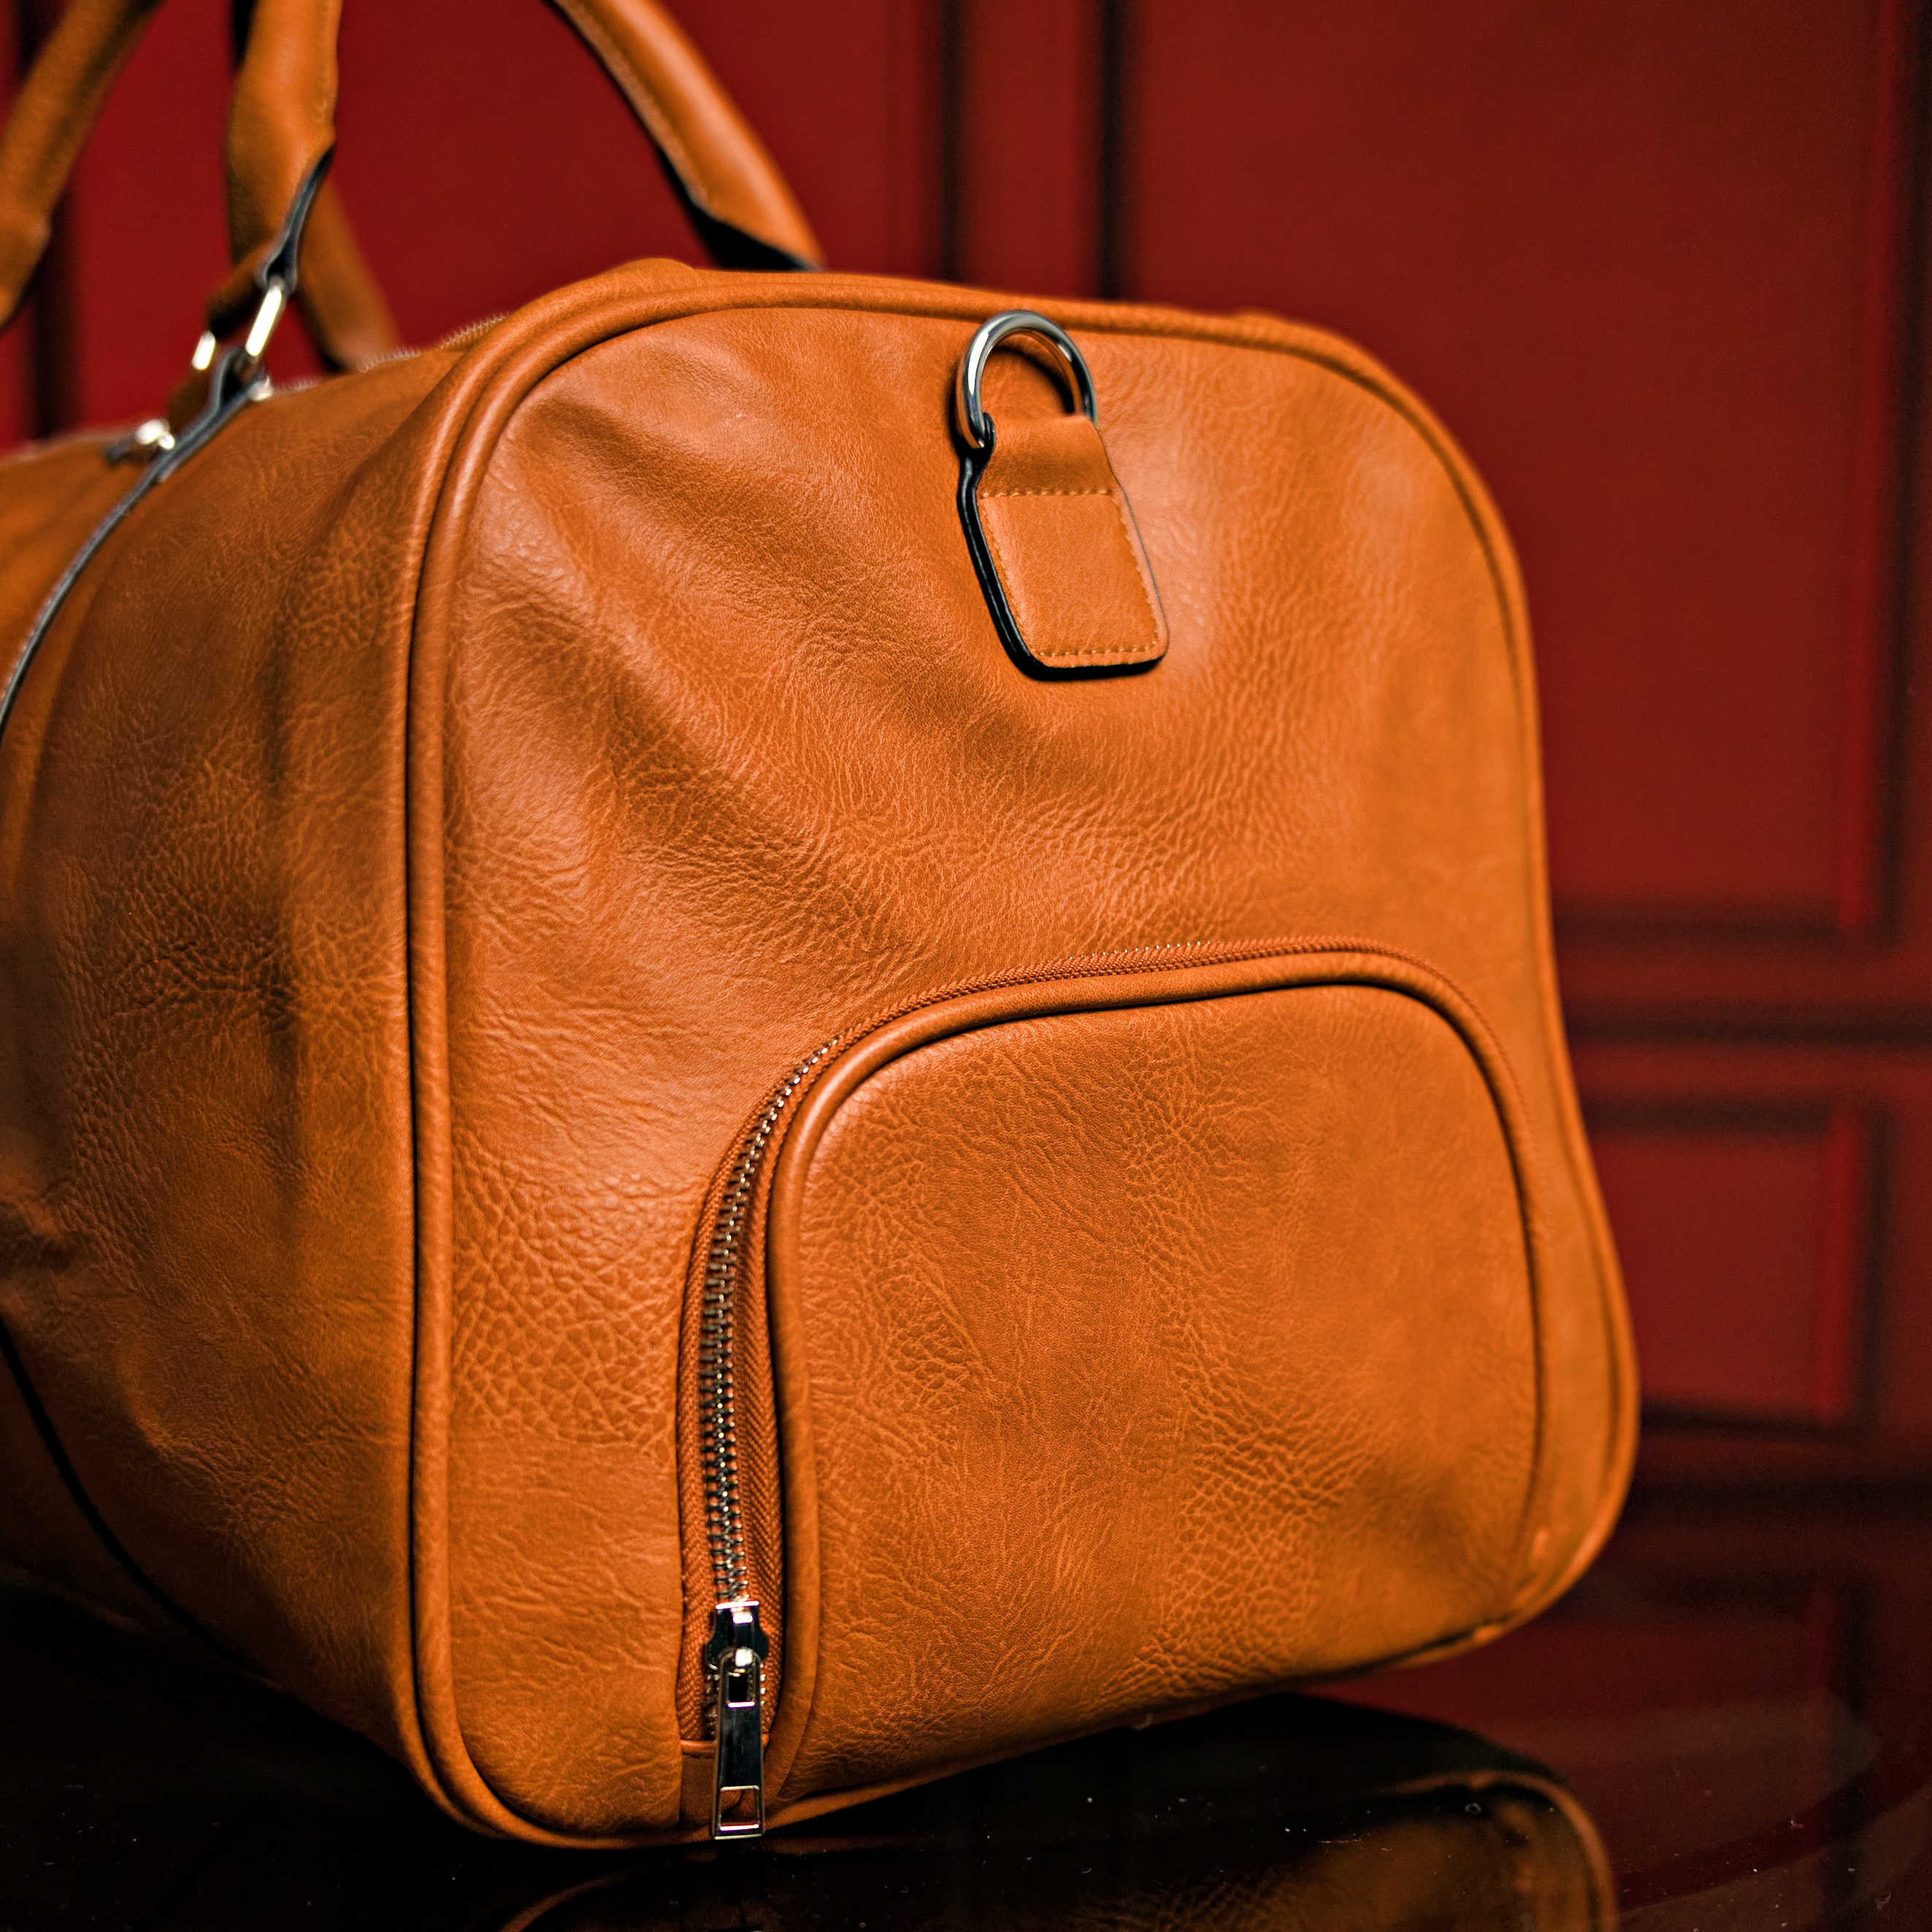 Brown Tumbled Leather Duffle Bag - Sole Premise